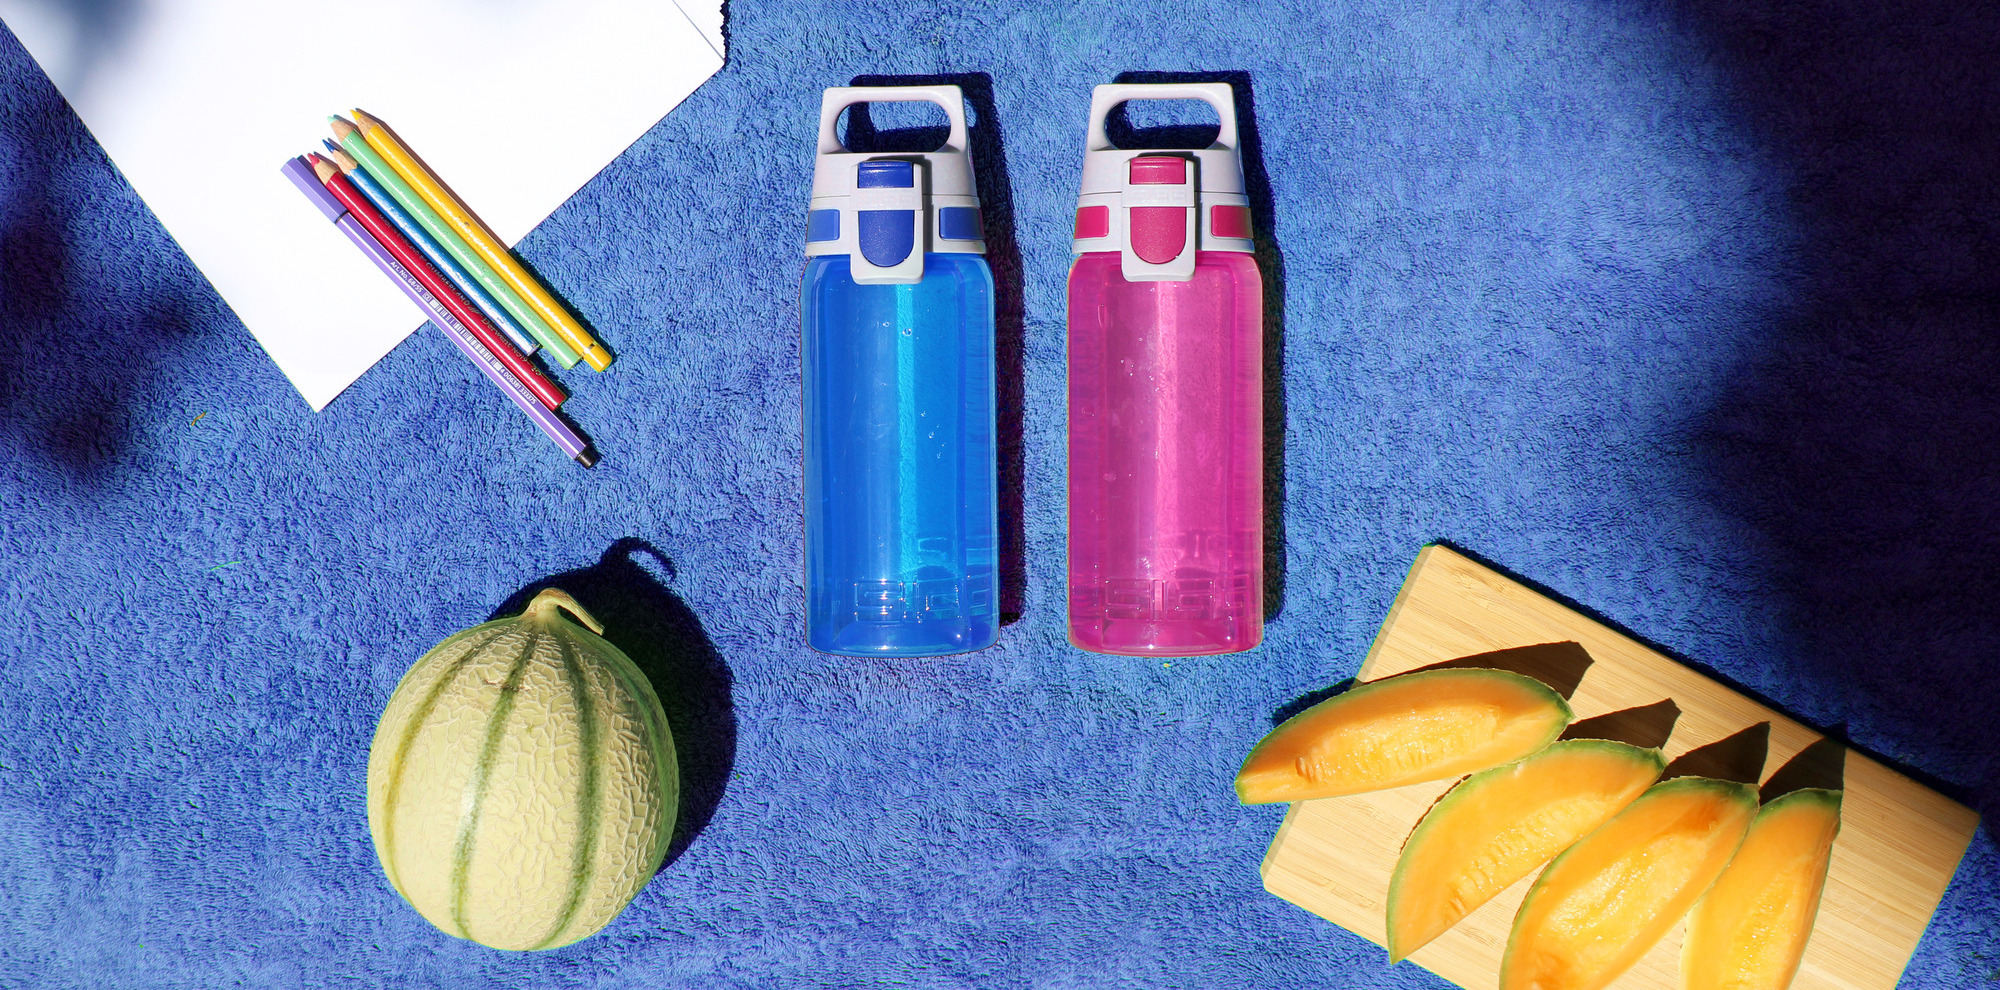 BEST IN CLASS: INTRODUCING THE PERFECT BACK-TO-SCHOOL BOTTLES